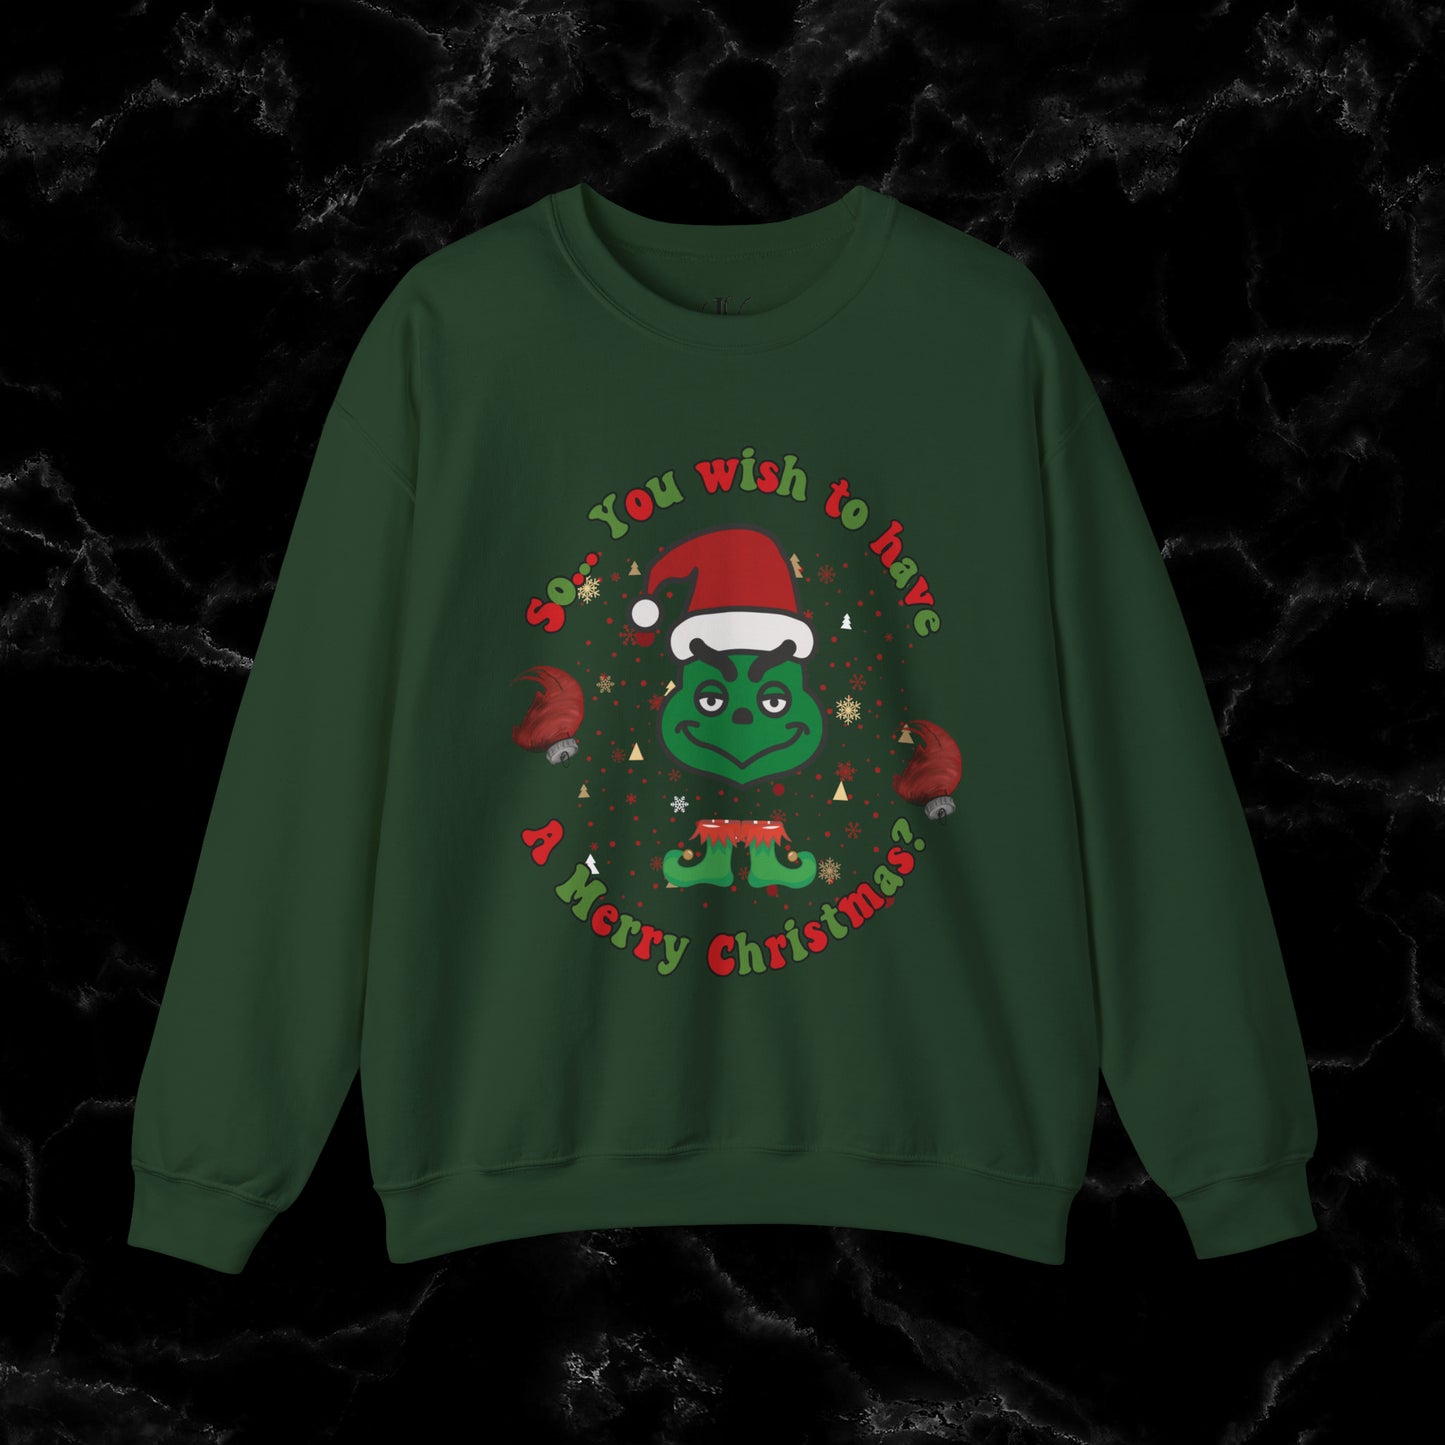 So You Wish To Have Merry Christmas Grinch Sweatshirt - Funny Grinchmas Gift Sweatshirt S Forest Green 